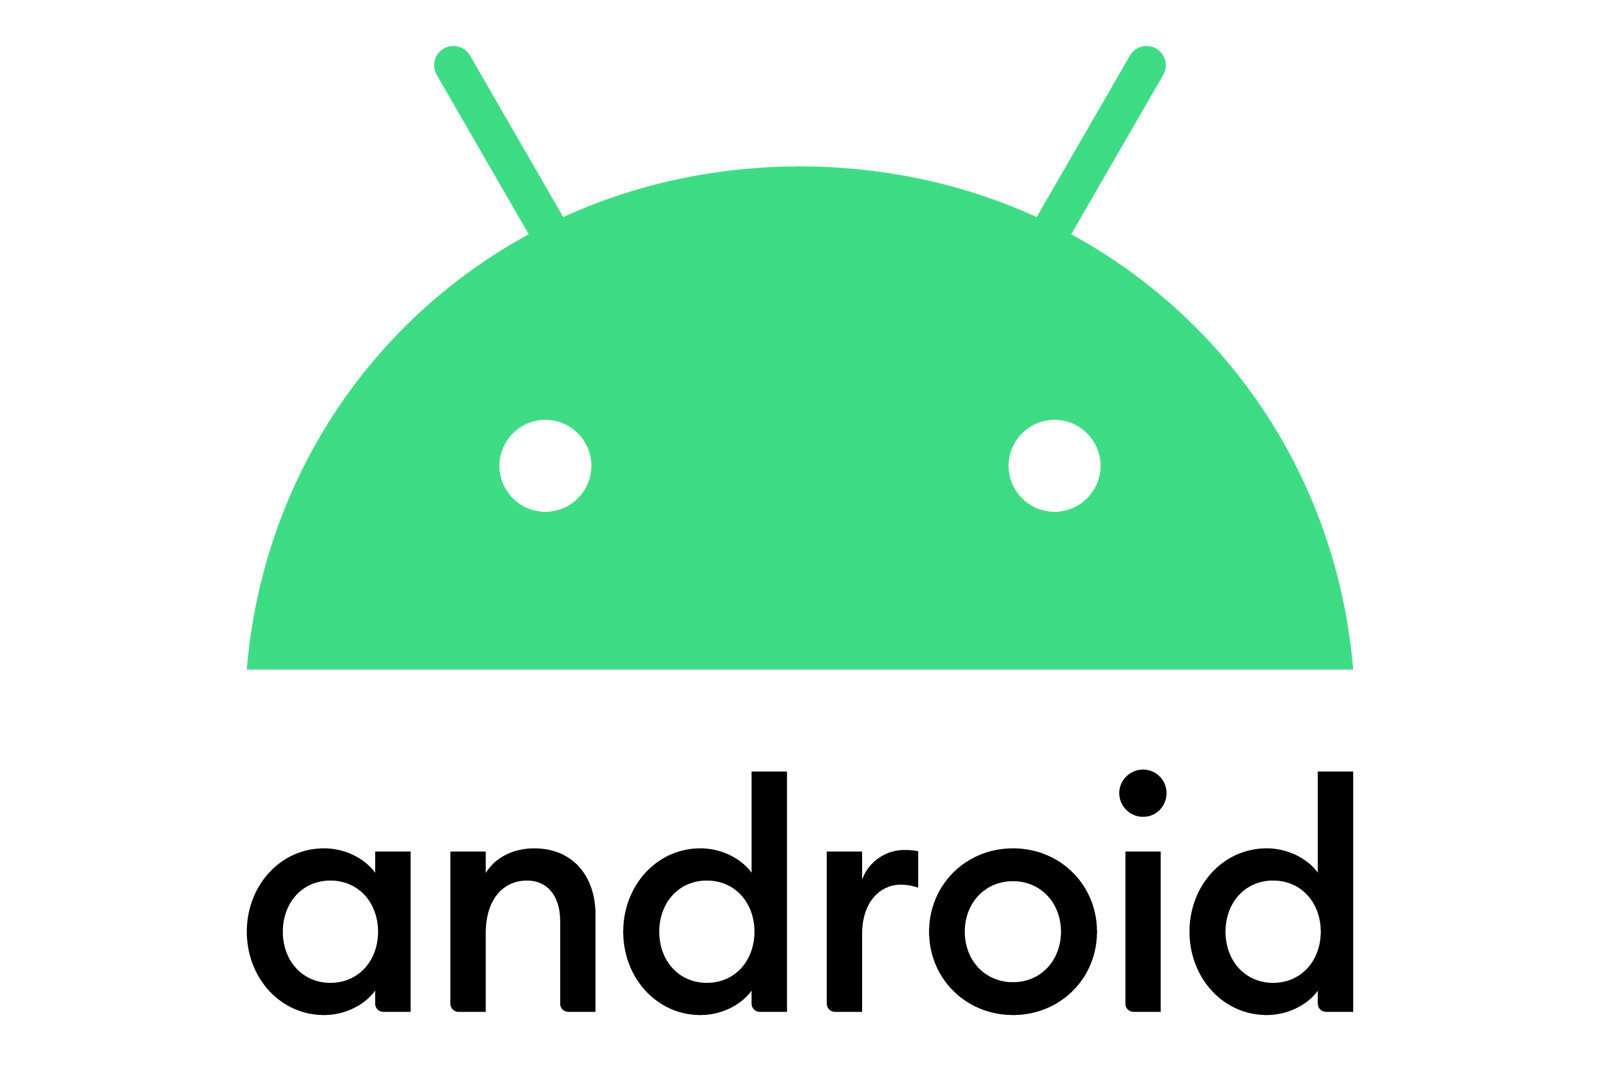 Quiz Android leve 2 for mobile developer